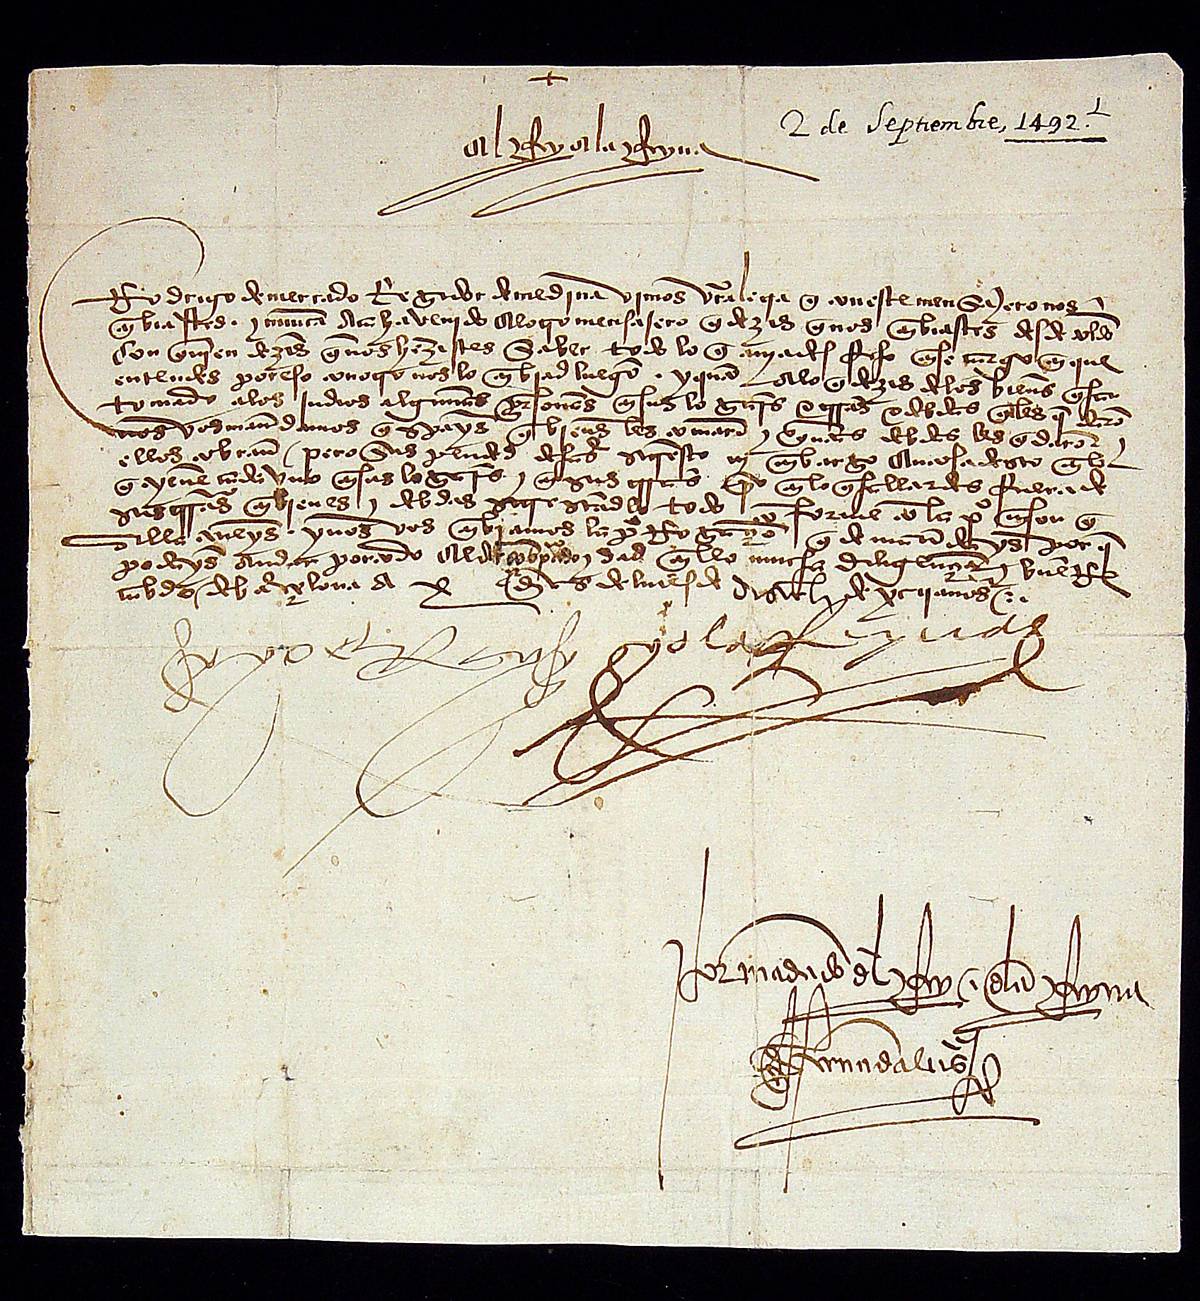 Photograph of a letter from King Ferdinand and Queen Isabella of Spain to Rodrigo de Mercado, the governor of Medina del Campo, regarding the treatment of Jews and their property, Barcelona, Spain, Dec. 10, 1492